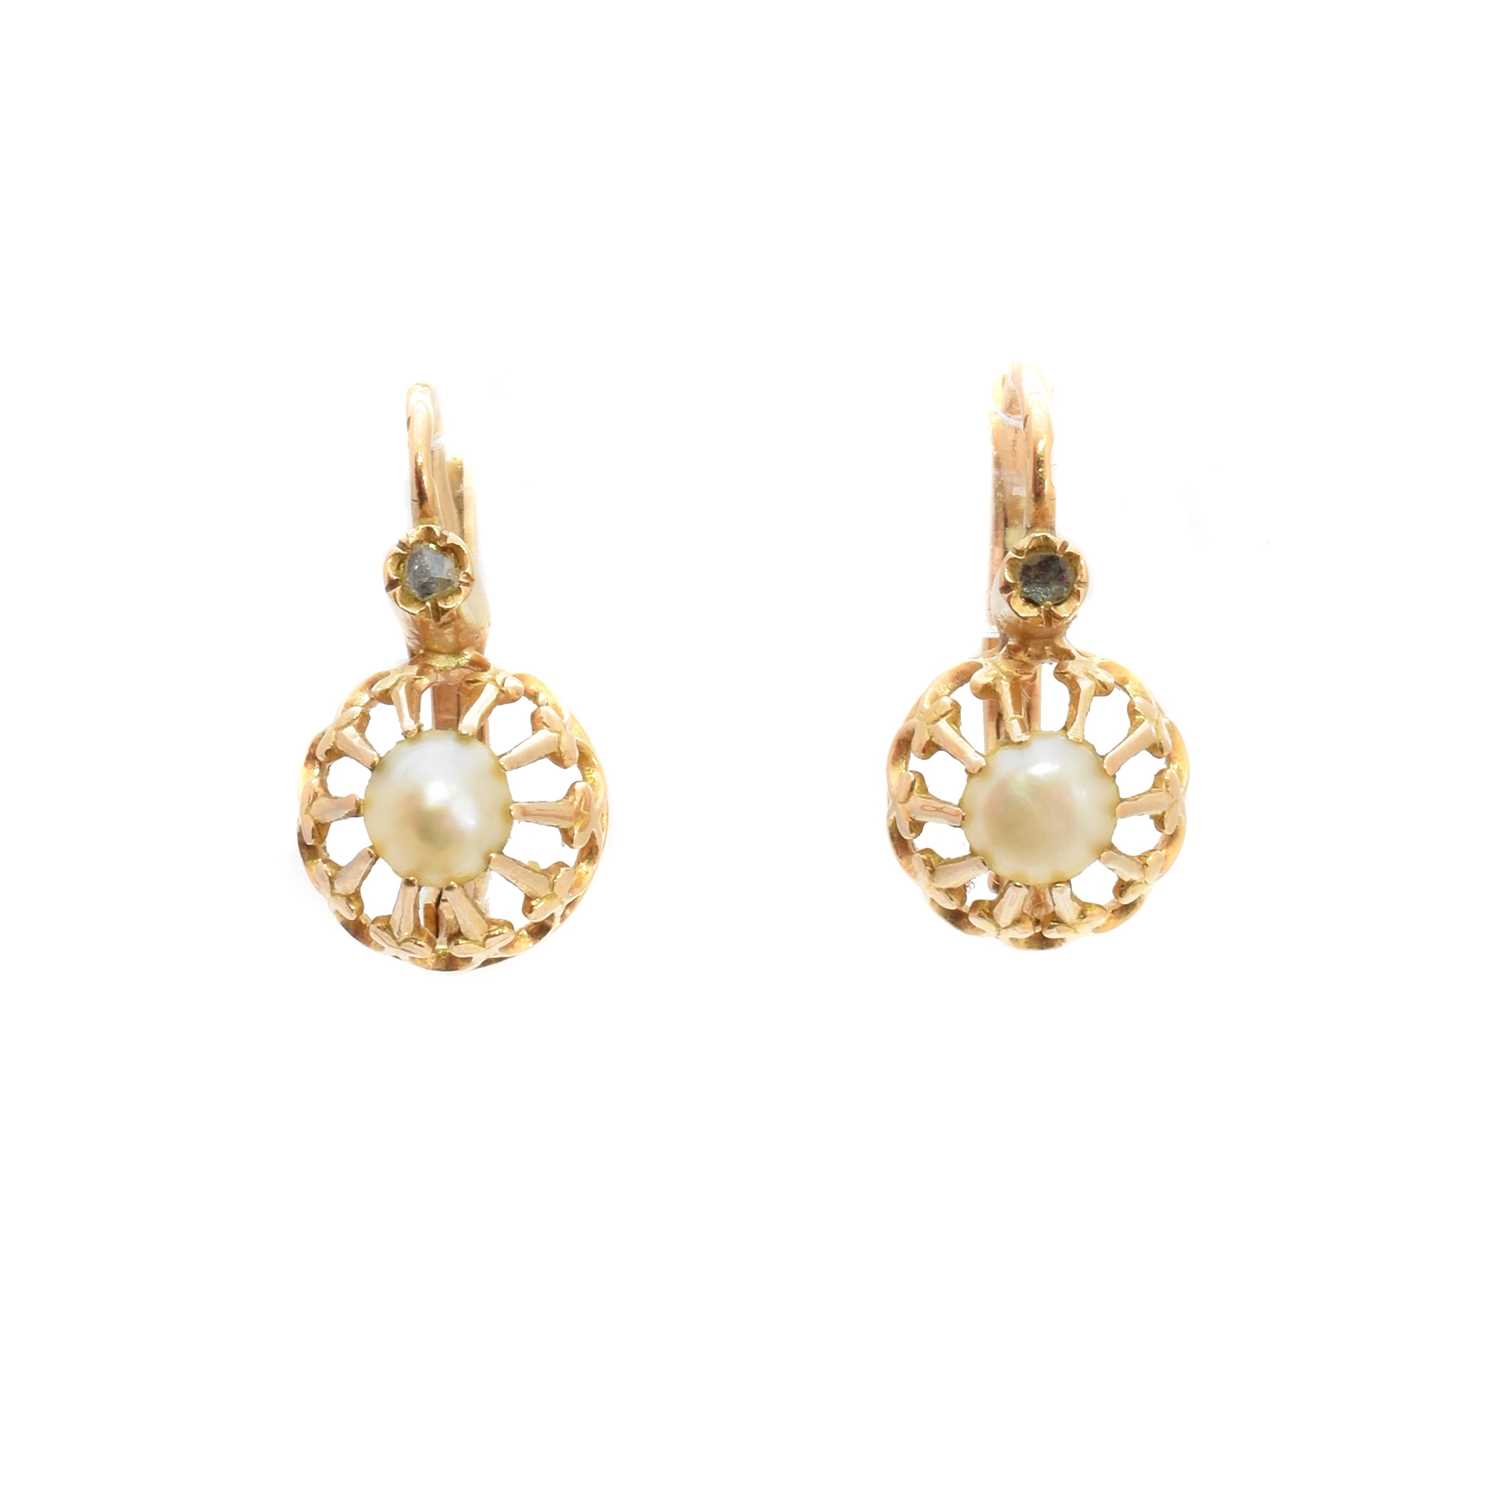 Lot 43 - A pair of 18ct gold pearl and diamond earrings